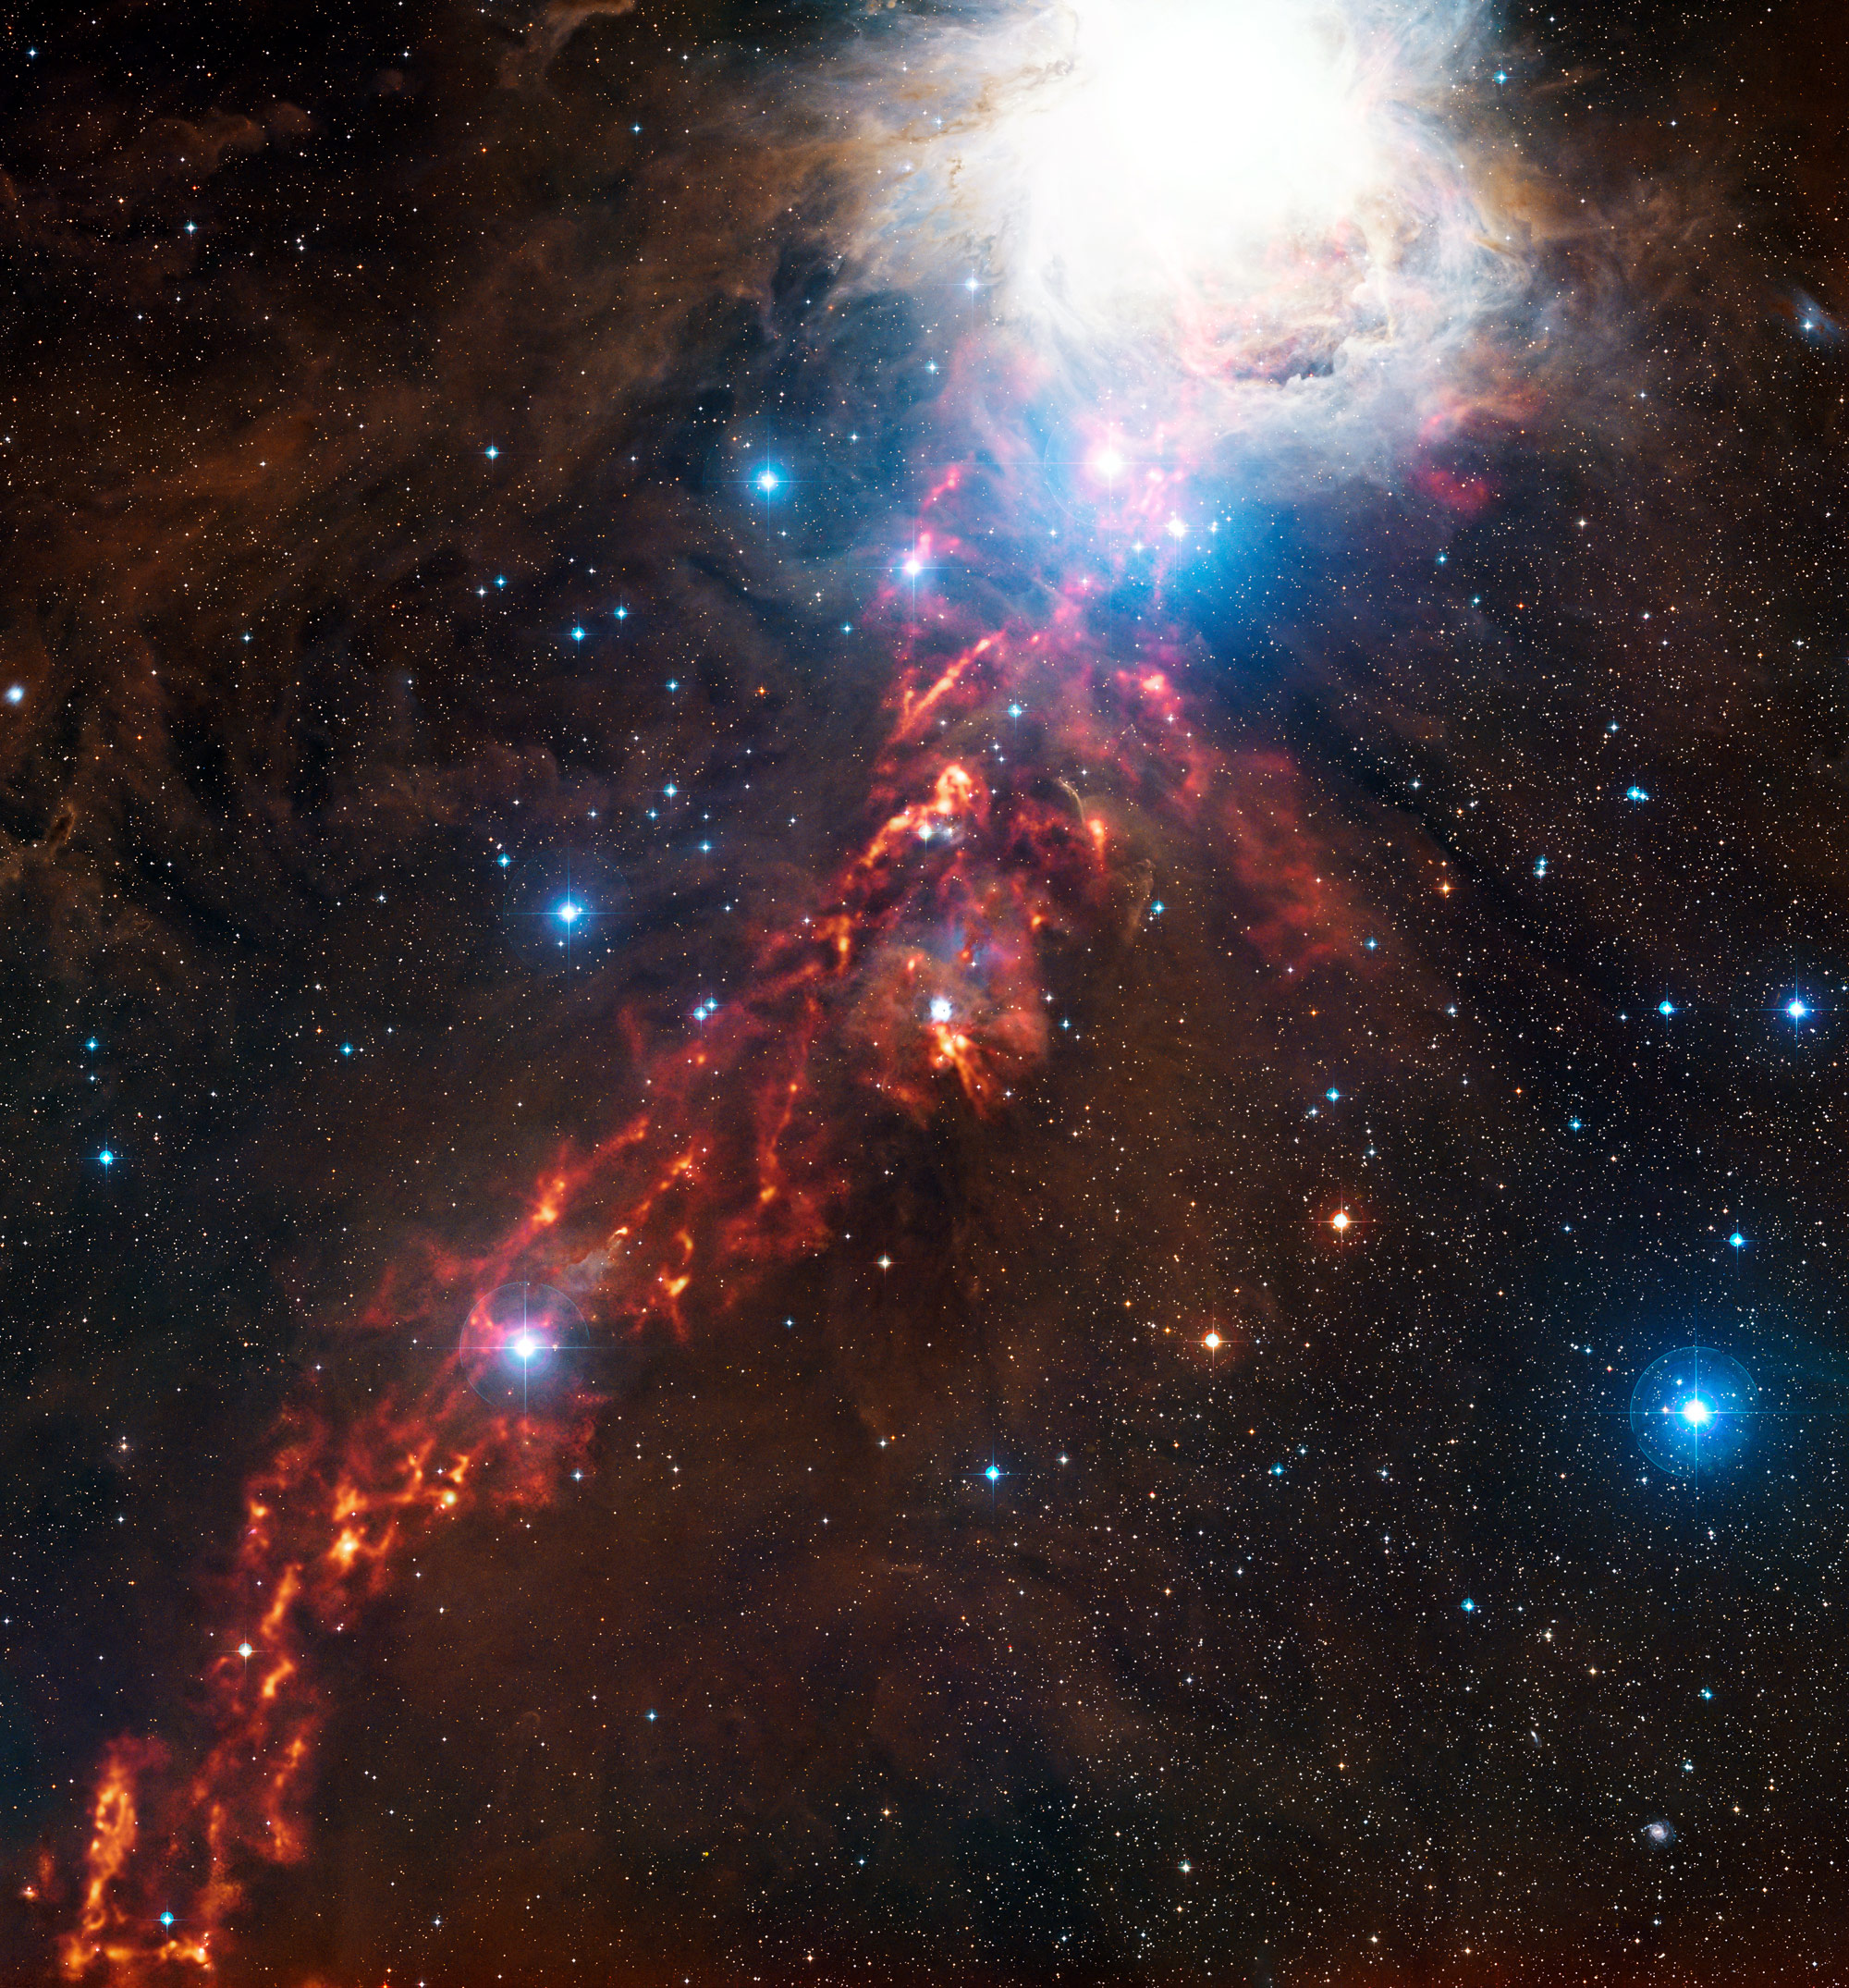 APEX Reveals Interstellar Dust in the Cosmic Clouds of Orion2000 x 2150